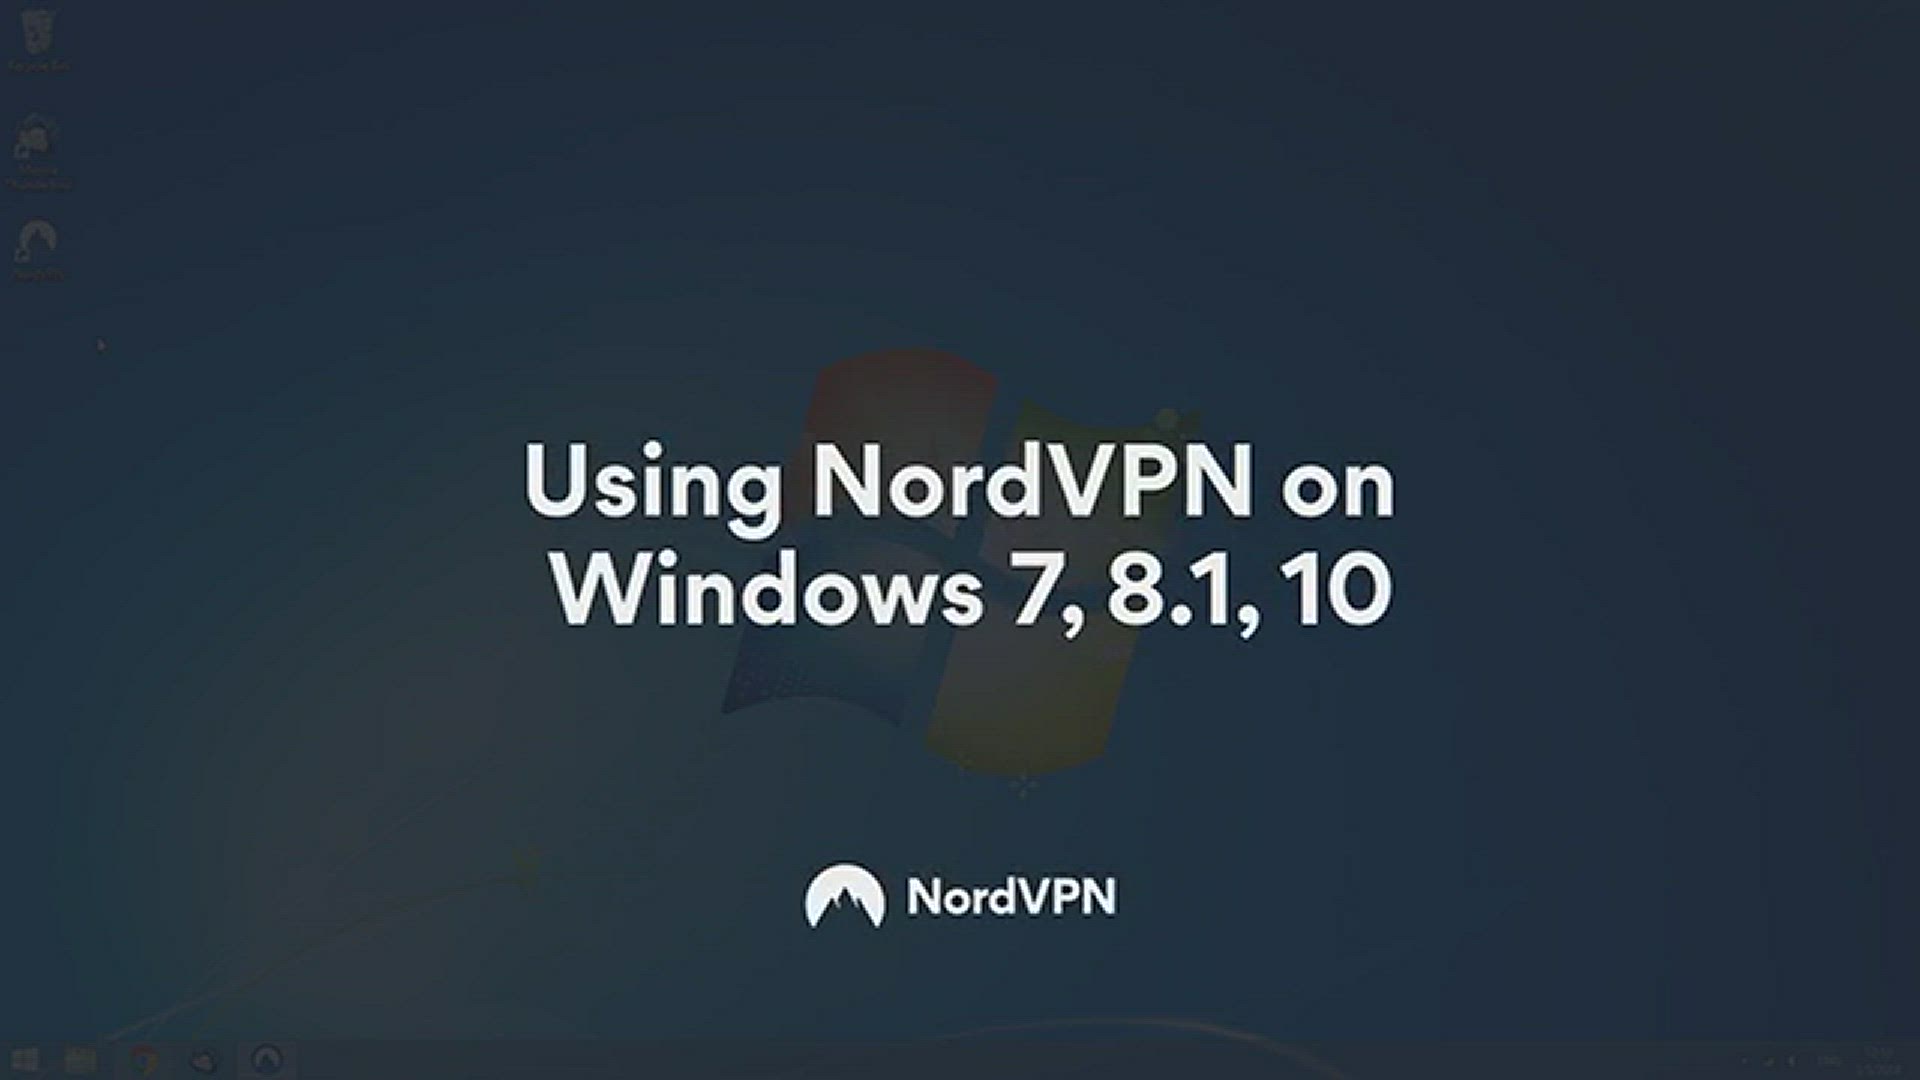 'Video thumbnail for How To Set Up and Use NordVPN on Windows 7, 8.1, 10'